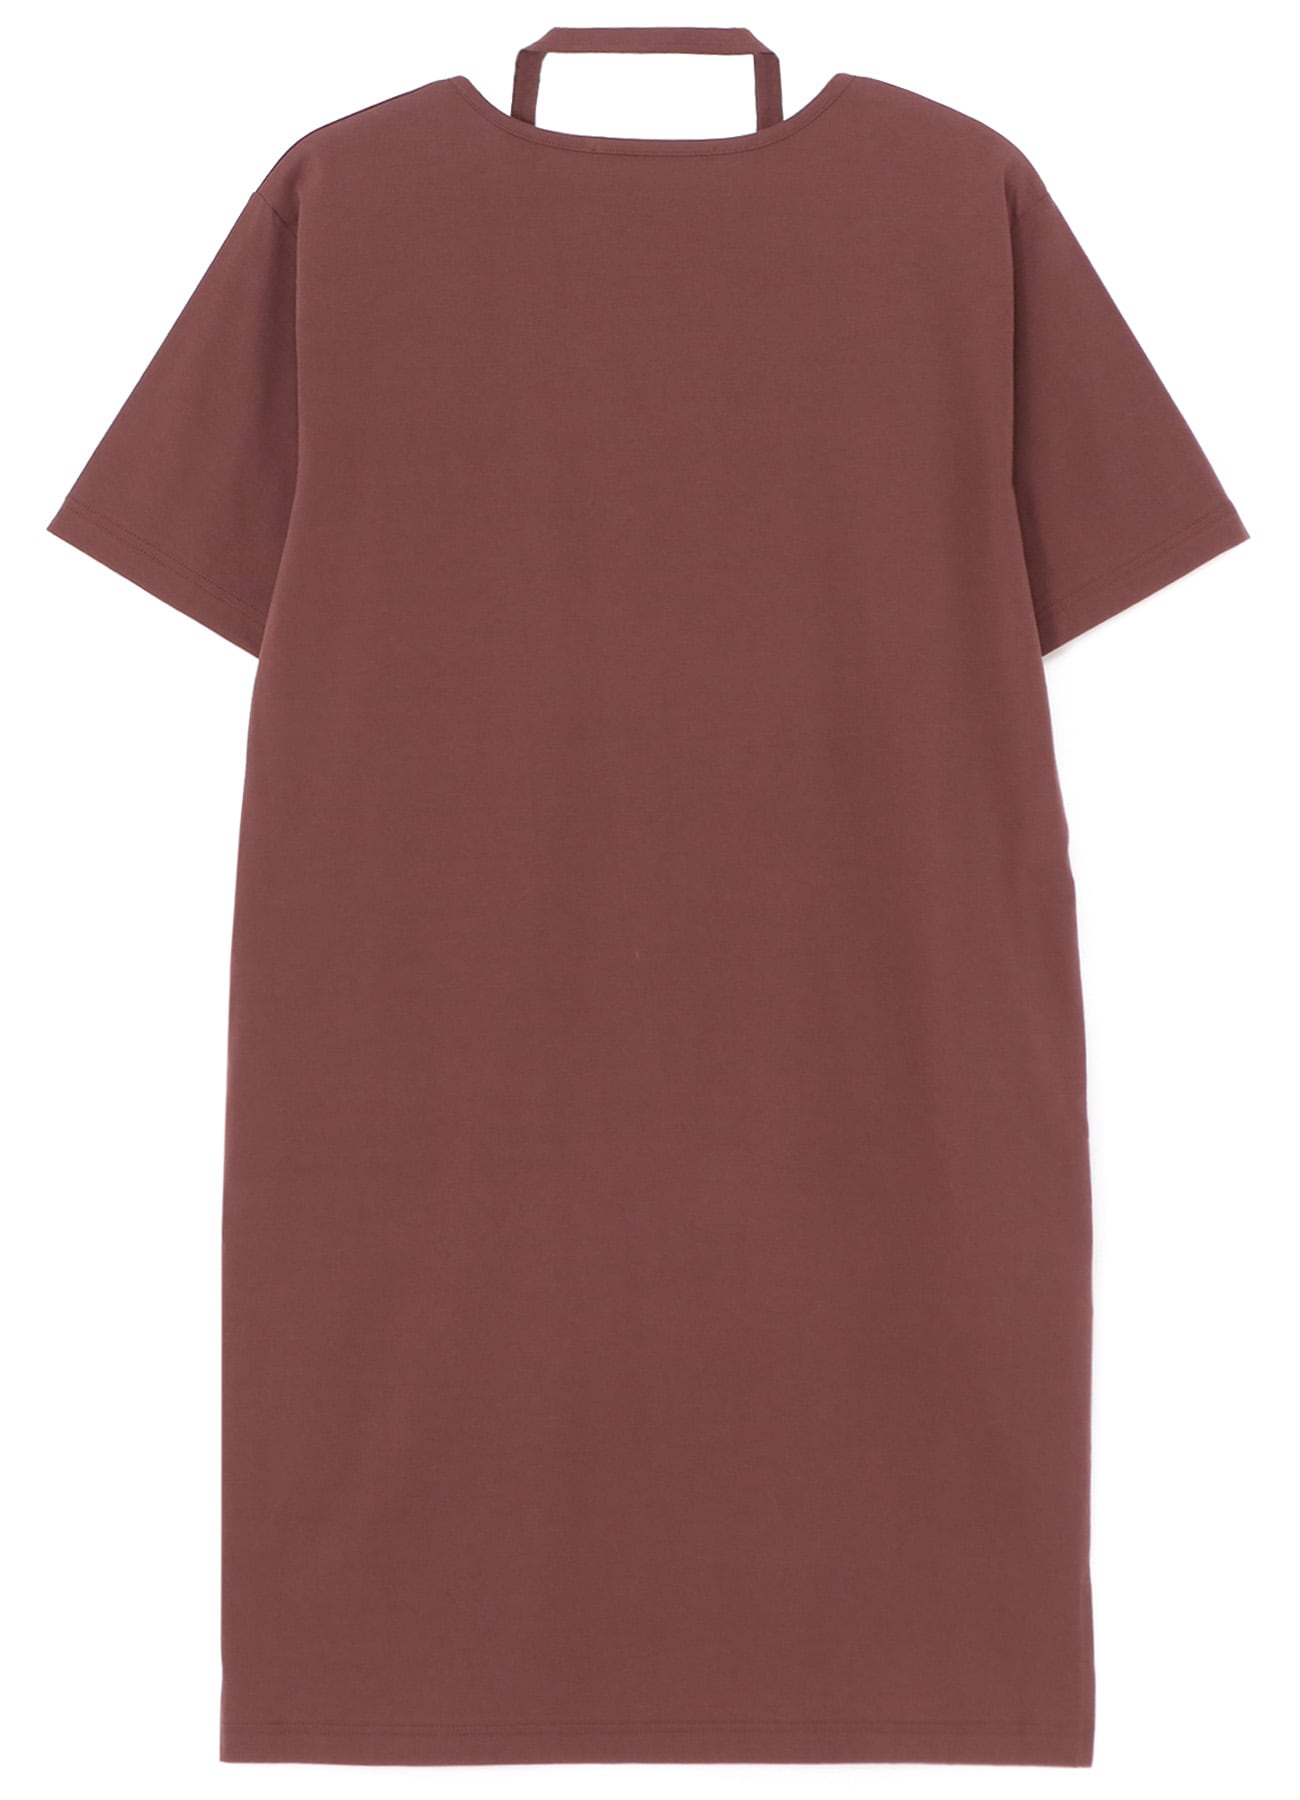 72/2 SINGLE COTTON JERSEY DRESS WITH DECONSTRUCTED NECKLINE